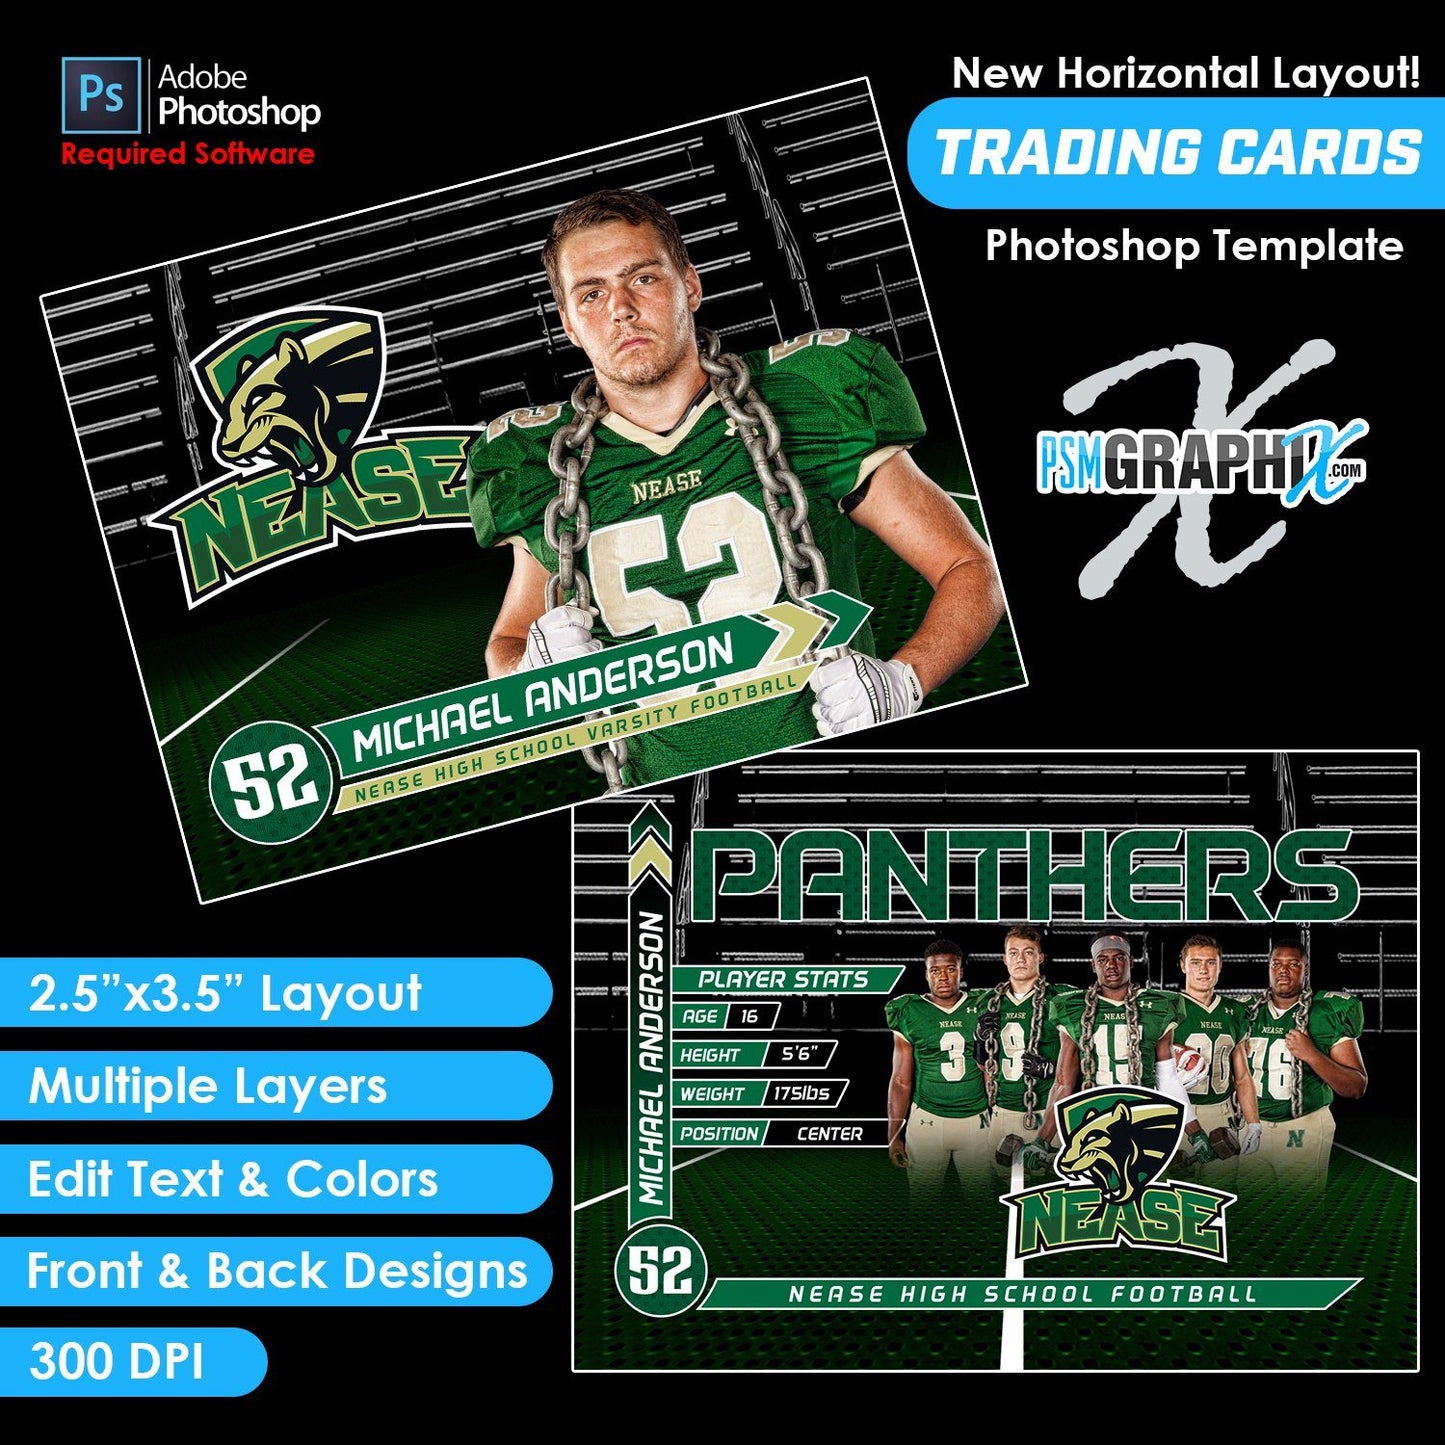 Friday Lights - V2 - Game Day Trading Card Template-Photoshop Template - PSMGraphix